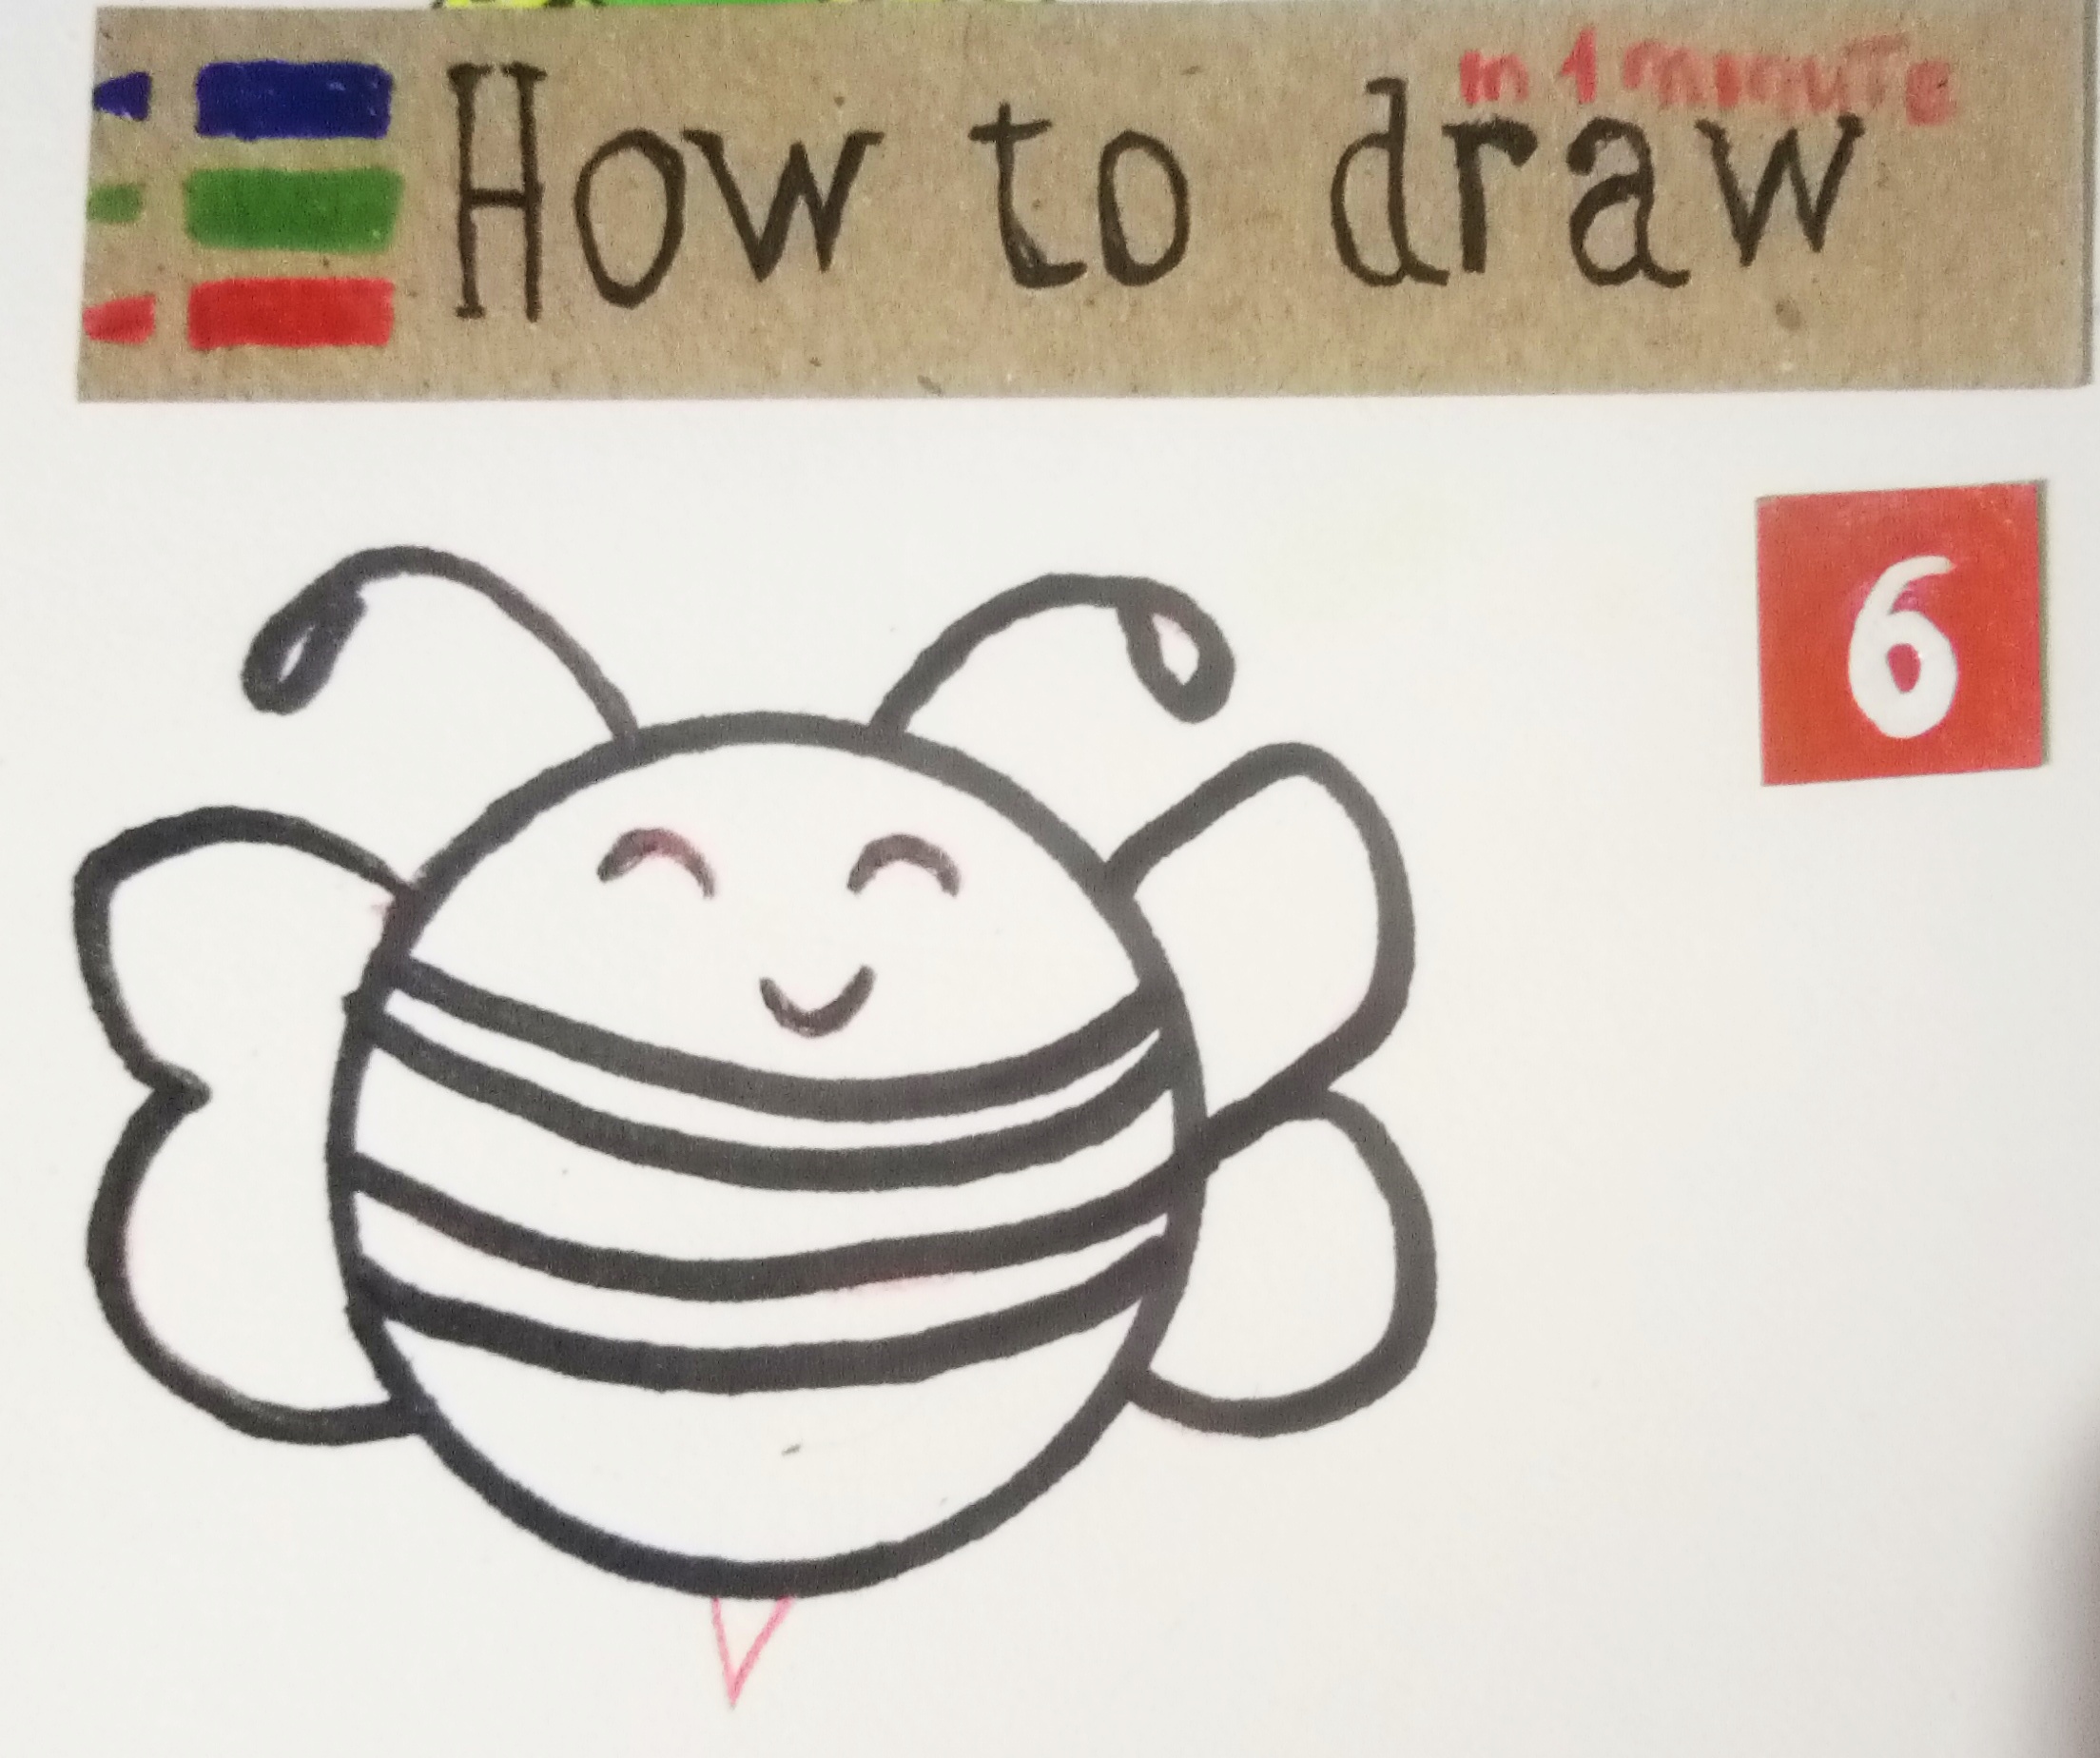 How to draw a bee, step by step lesson